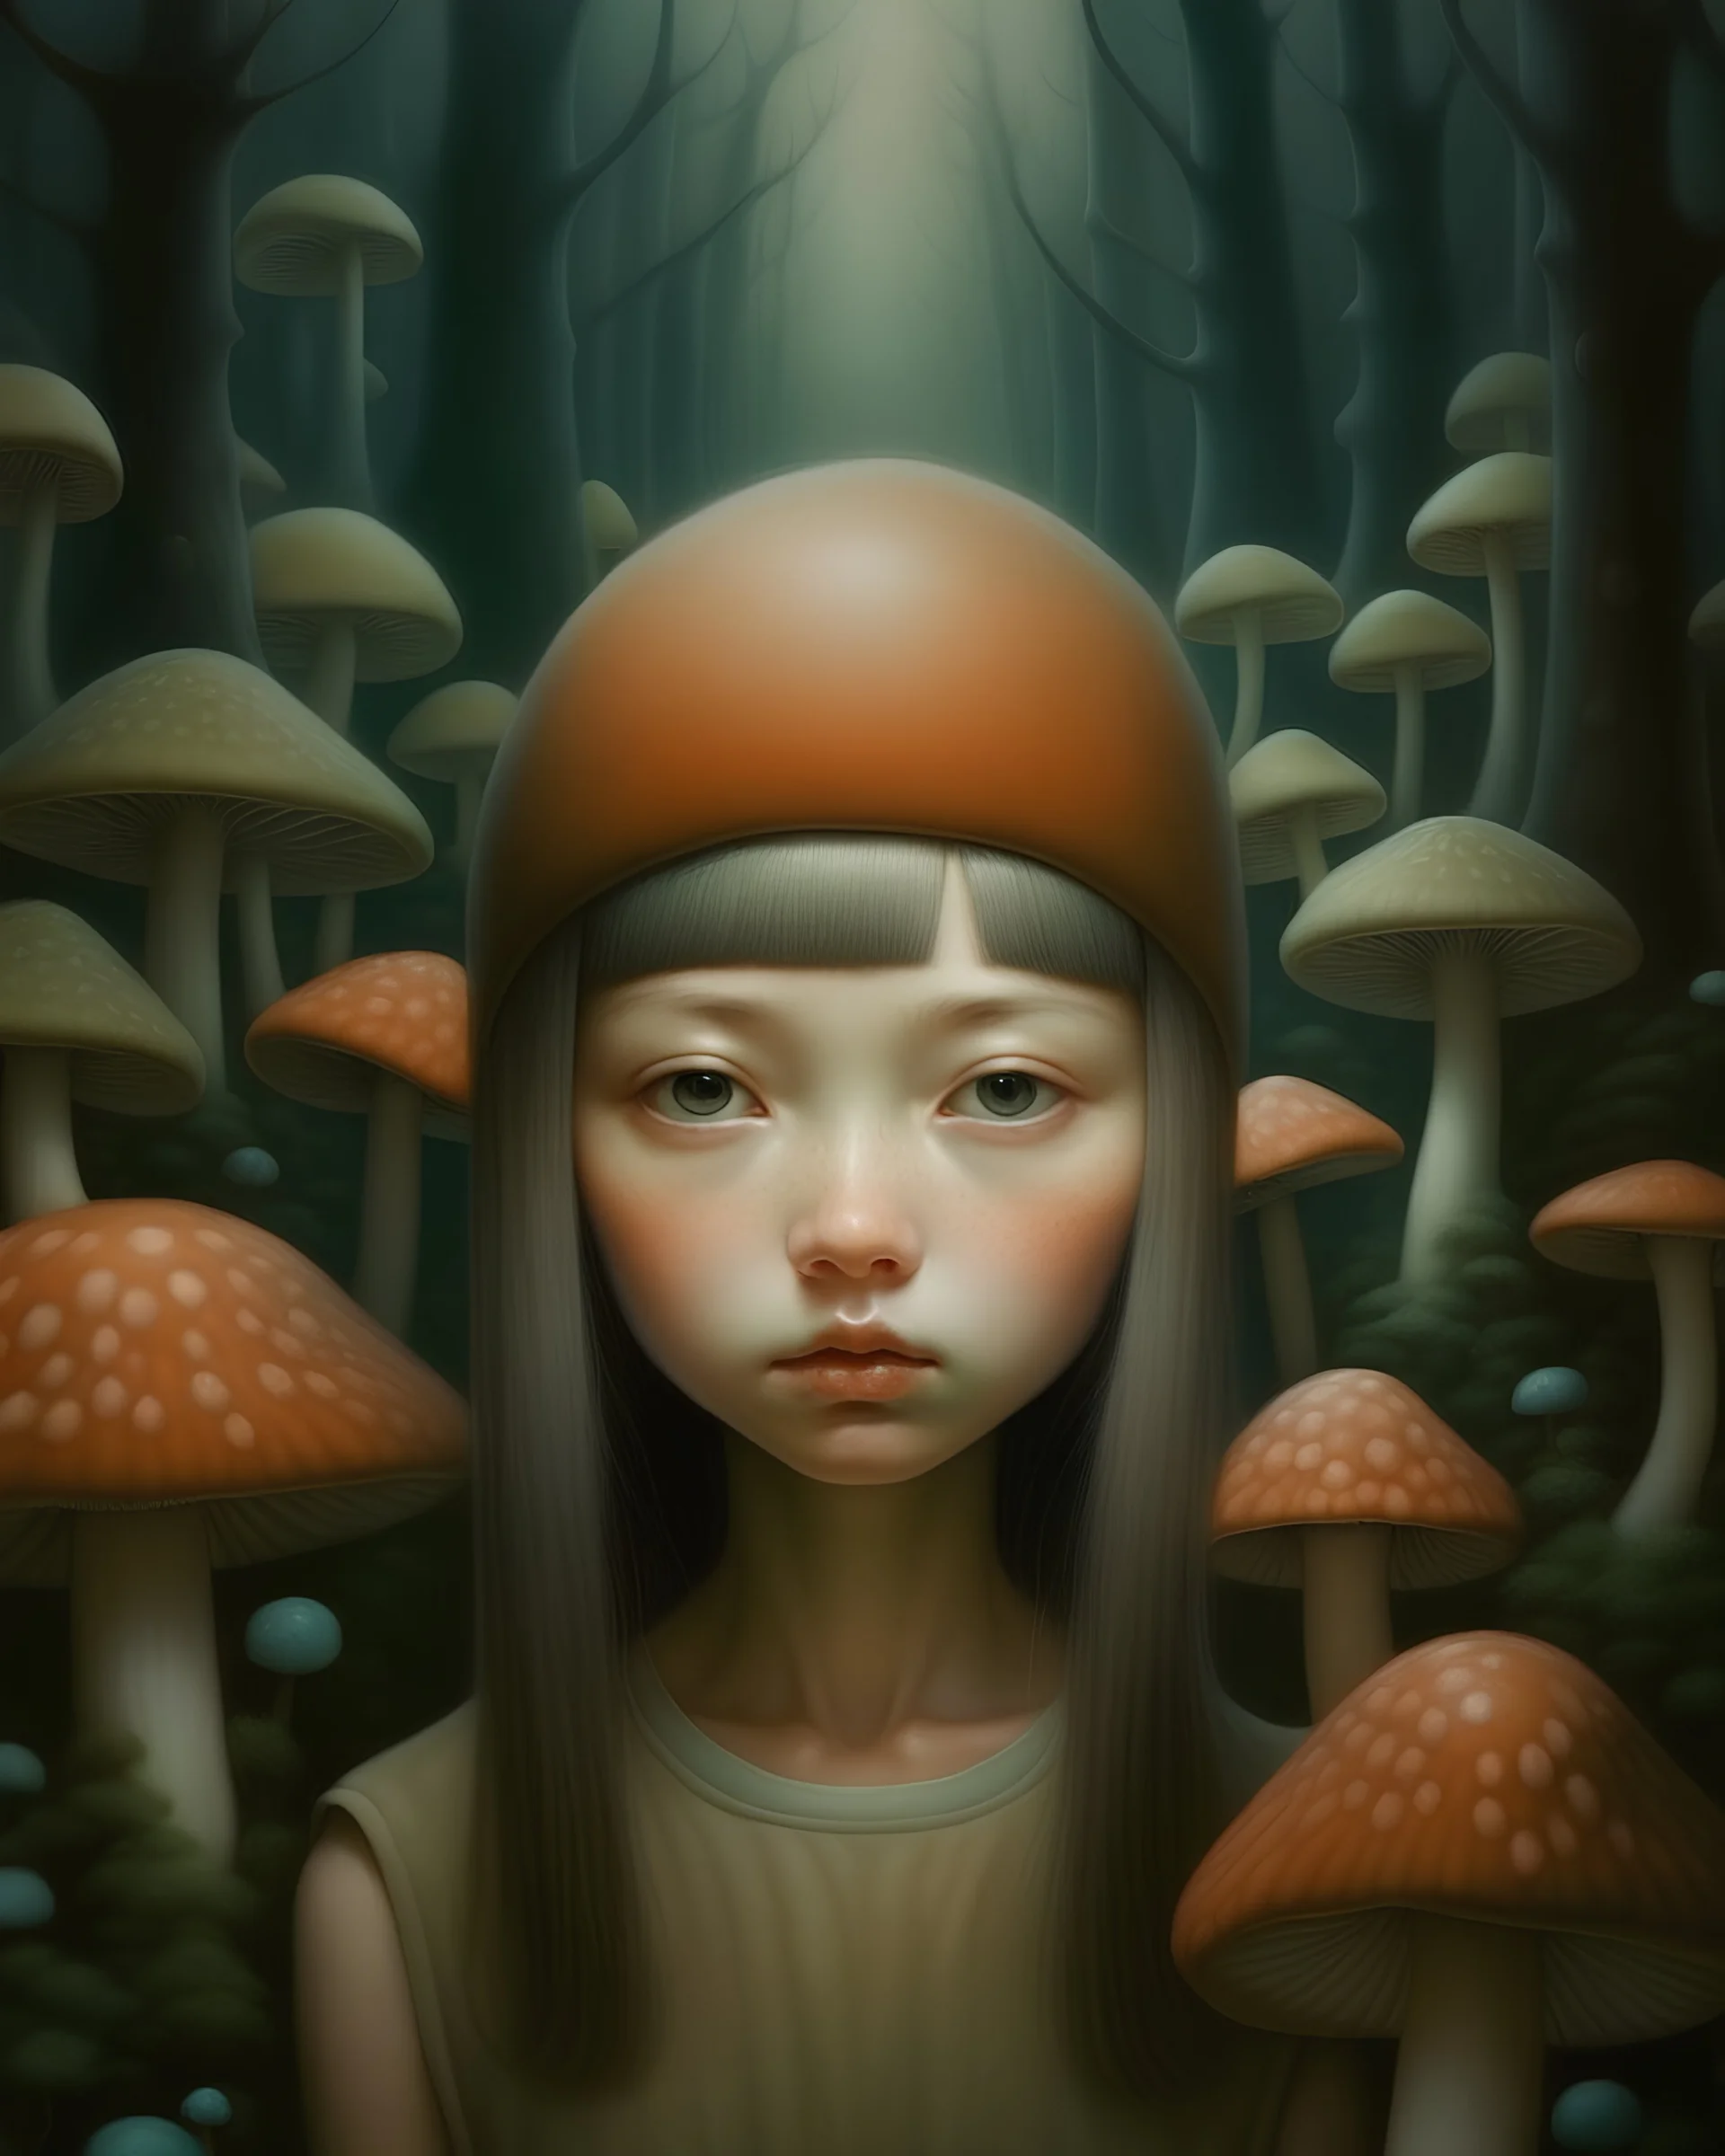 Painting in art style of Nicoletta Ceccoli, Daria Petrilli and Anton Semenov, minimalist style. Painting of the girl surrounded by the mushrooms in the forest.